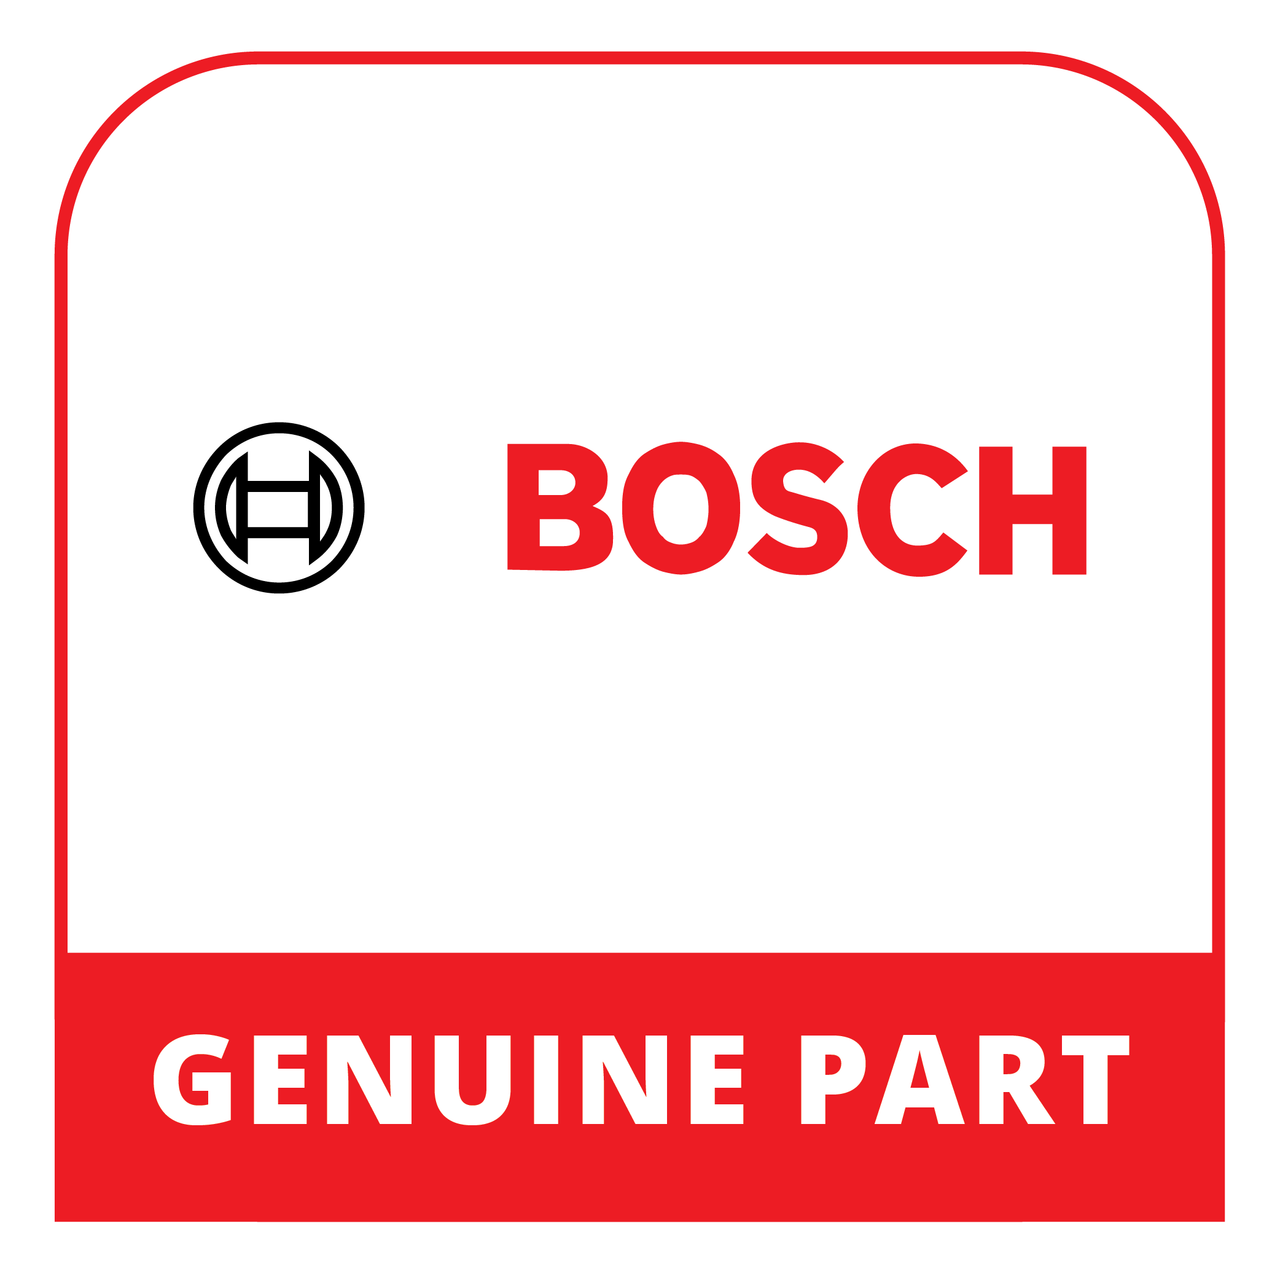 Bosch (Thermador) 11043380 - Back Wall Panel - Genuine Bosch (Thermador) Part